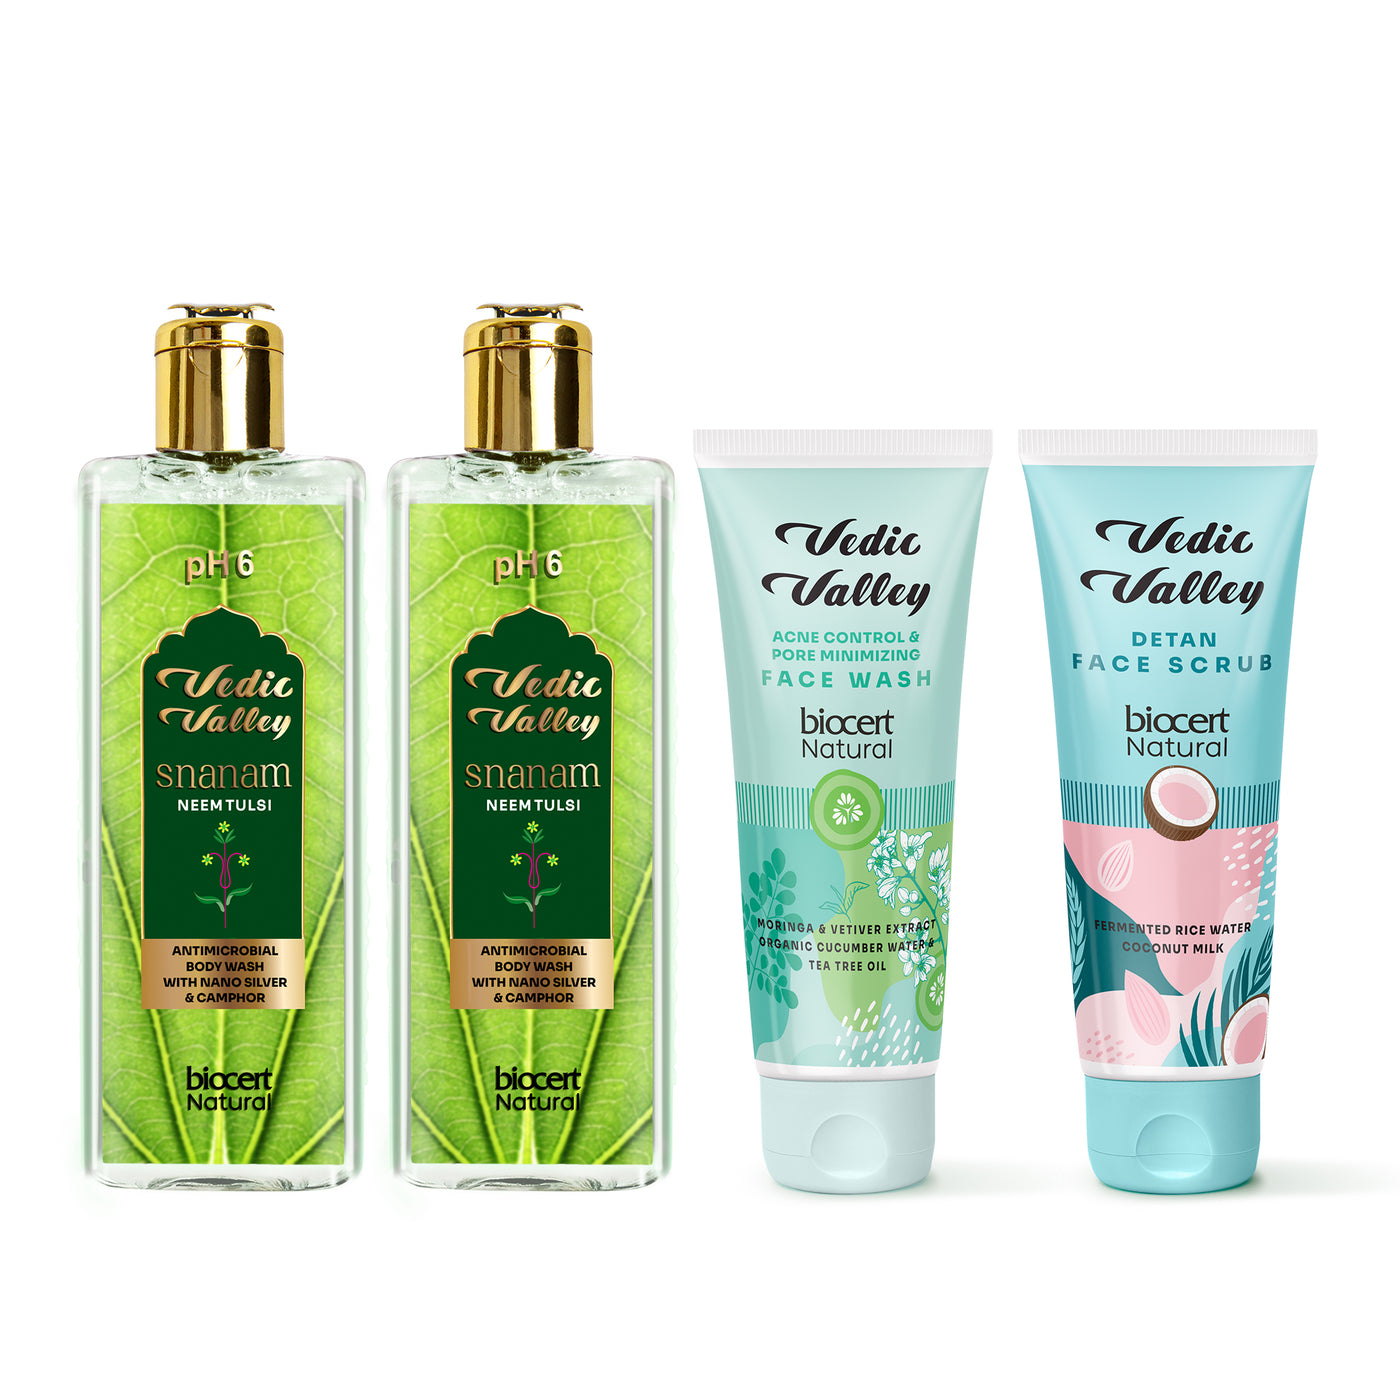 Neem Tulsi Body Wash & Oud Body Lotion (Acne Control Face wash and Face scrub)